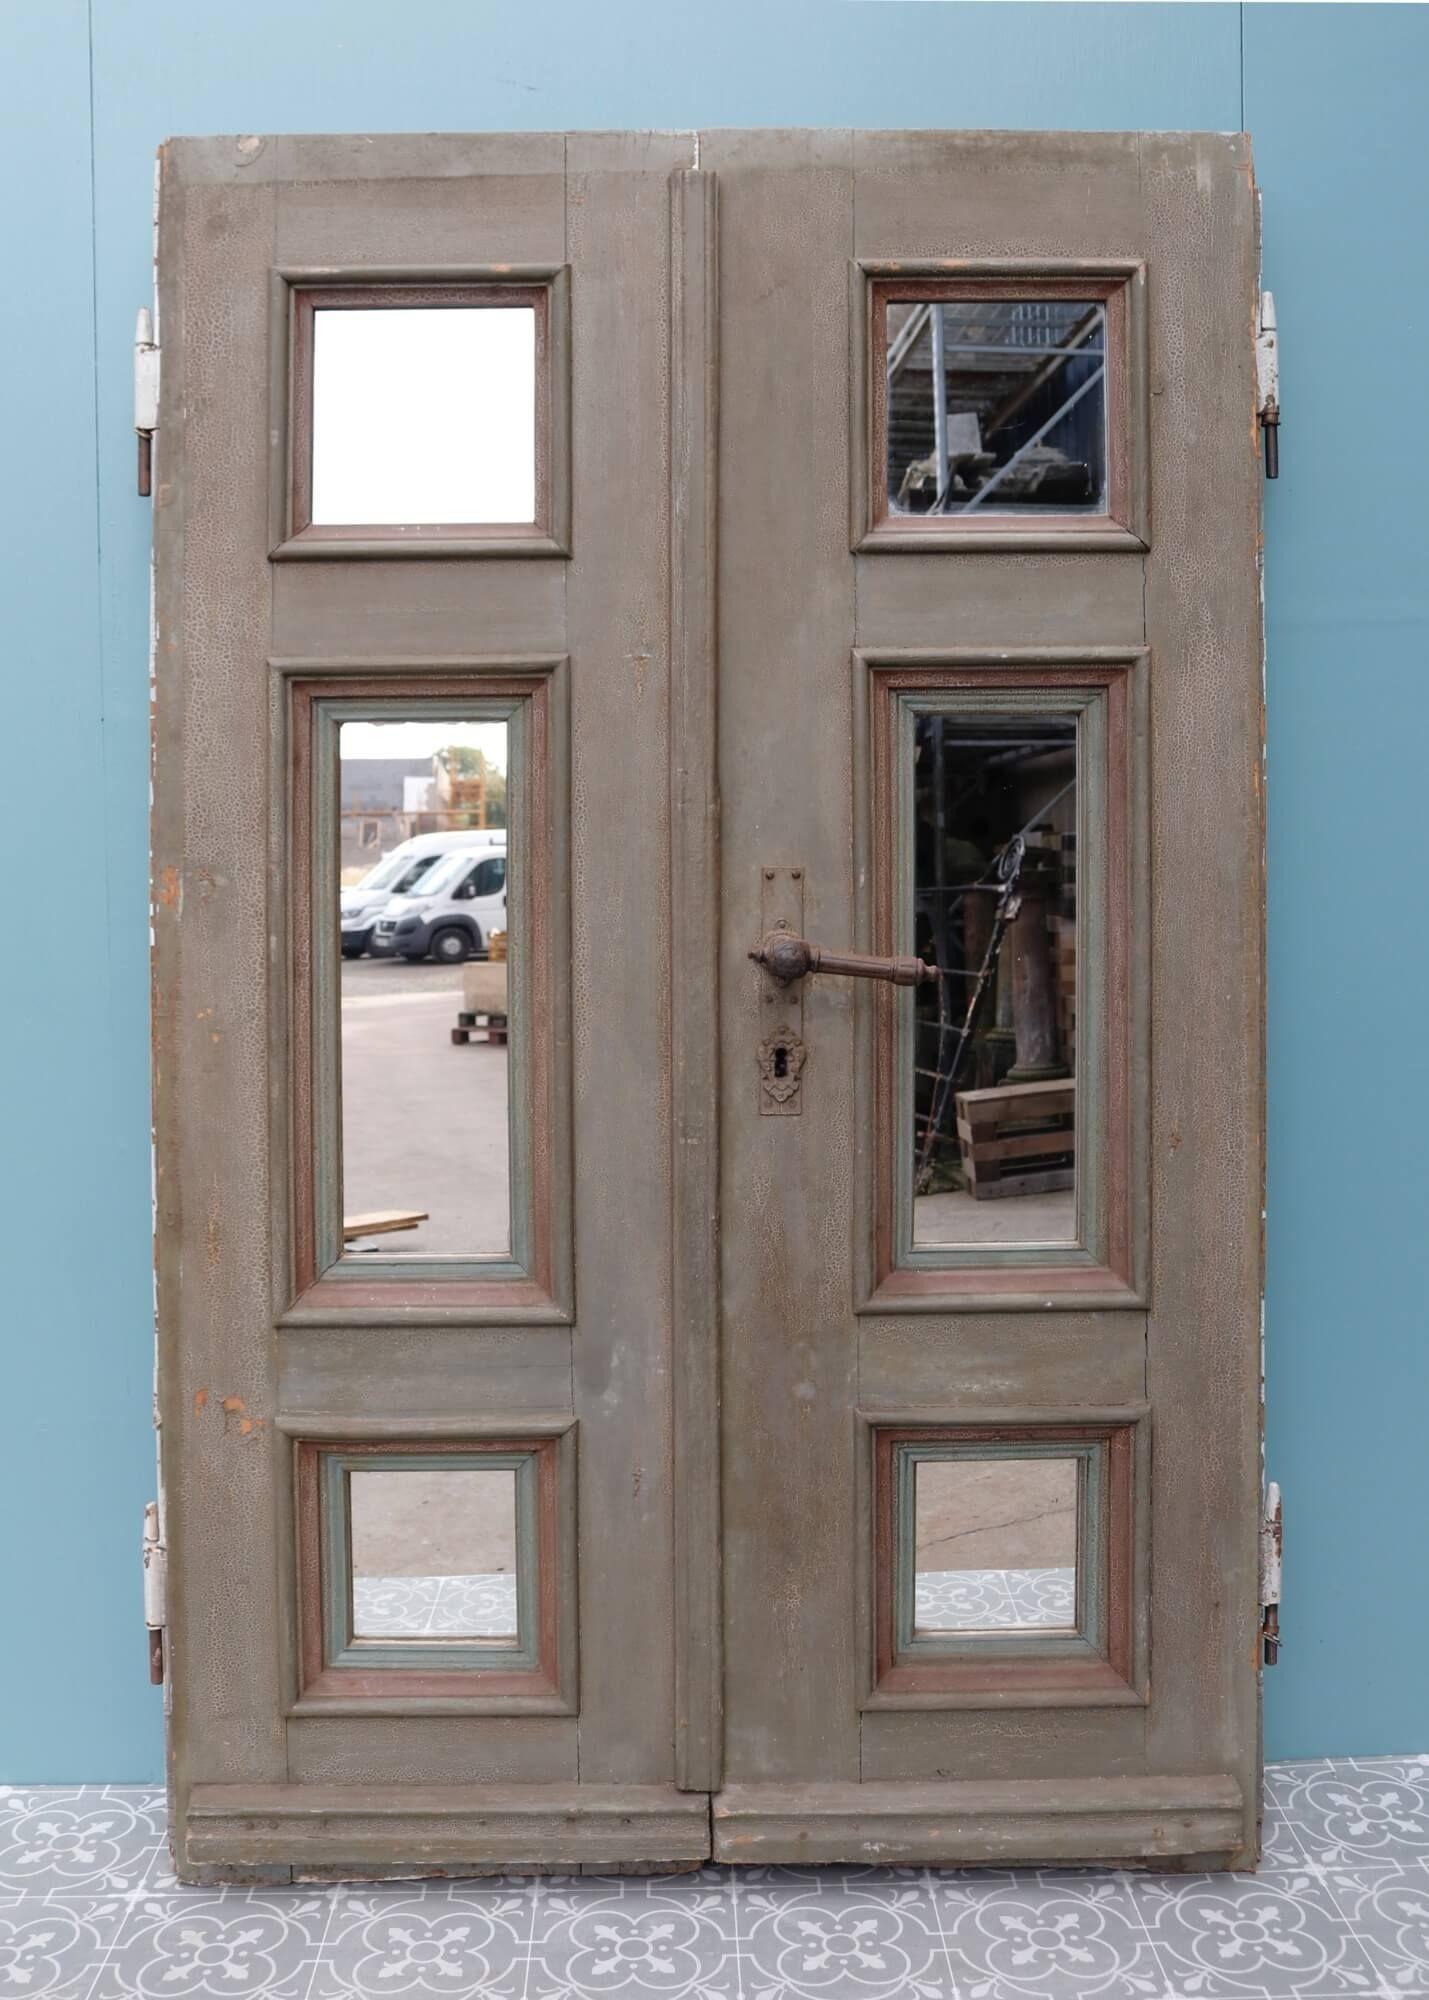 A set of German antique double doors dating from the late 19th century and later fitted with mirrors. These doors were likely once used as external doors but are now more suited to being tall cupboard or wardrobe doors thanks to their mirrored